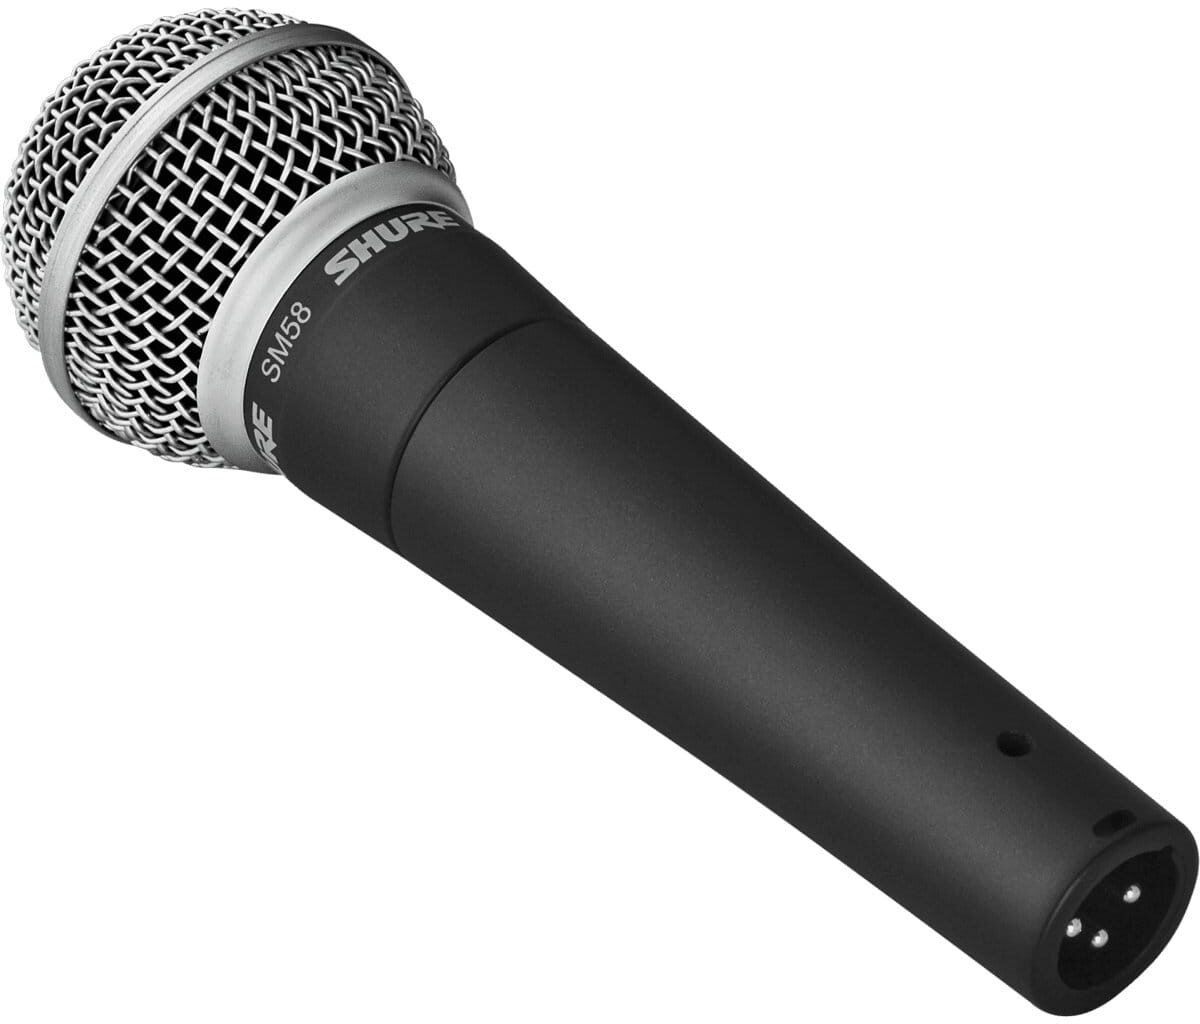 Shure SM58 Dynamic Handheld Microphone | zZounds